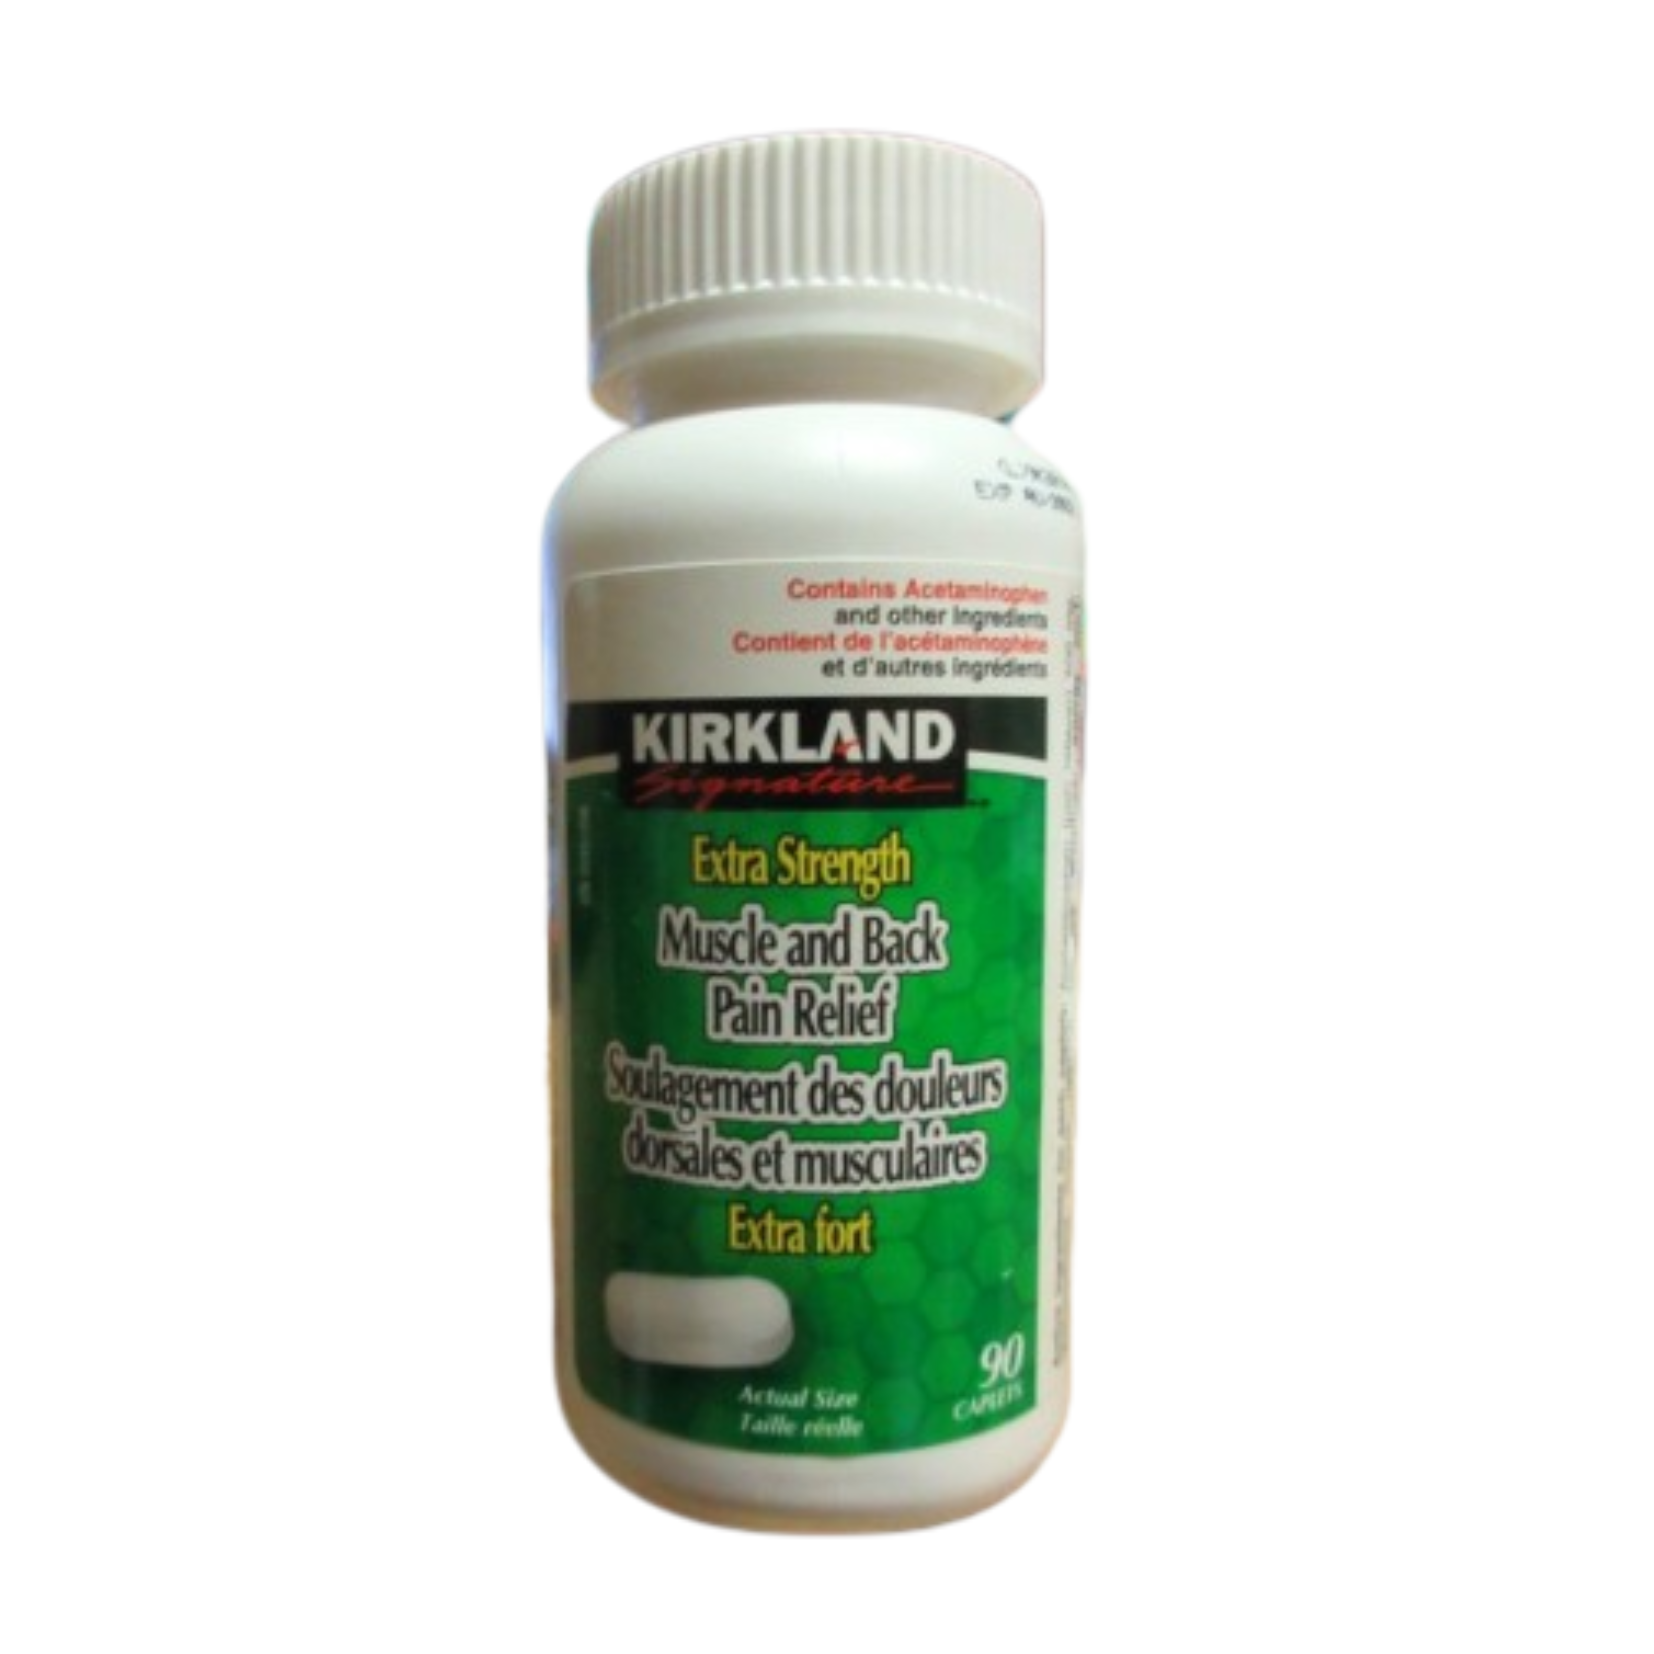 Kirkland Signature Extra Strength Muscle and Back Pain Relief Caplets 90ct